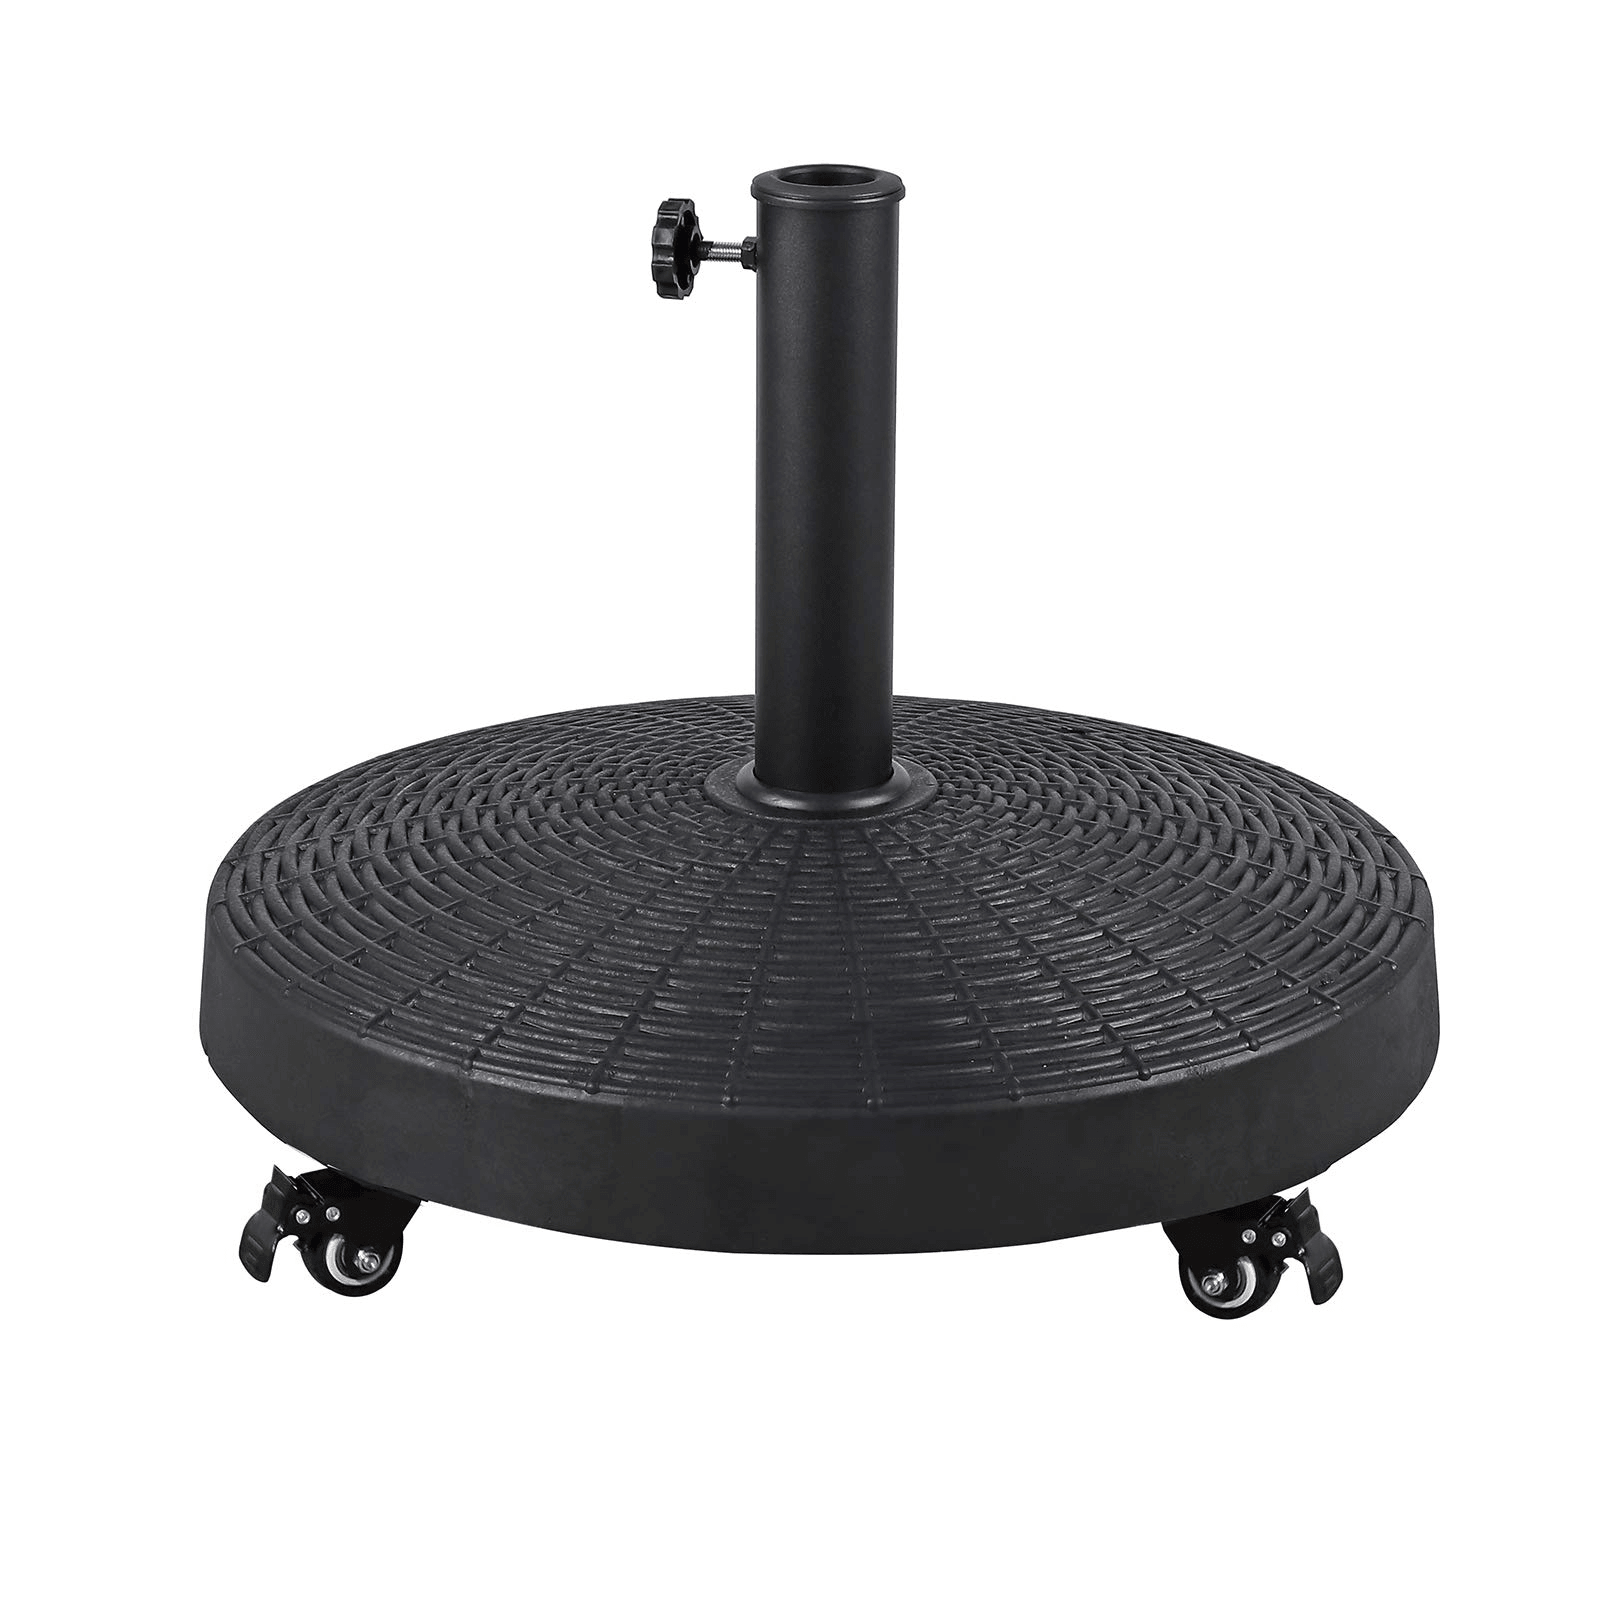 Patio Umbrella Base with Wheels,  Resin Heavy-Duty Stand Weights for Outdoor Market Umbrella, 52lbs, Black | Orange-Casual